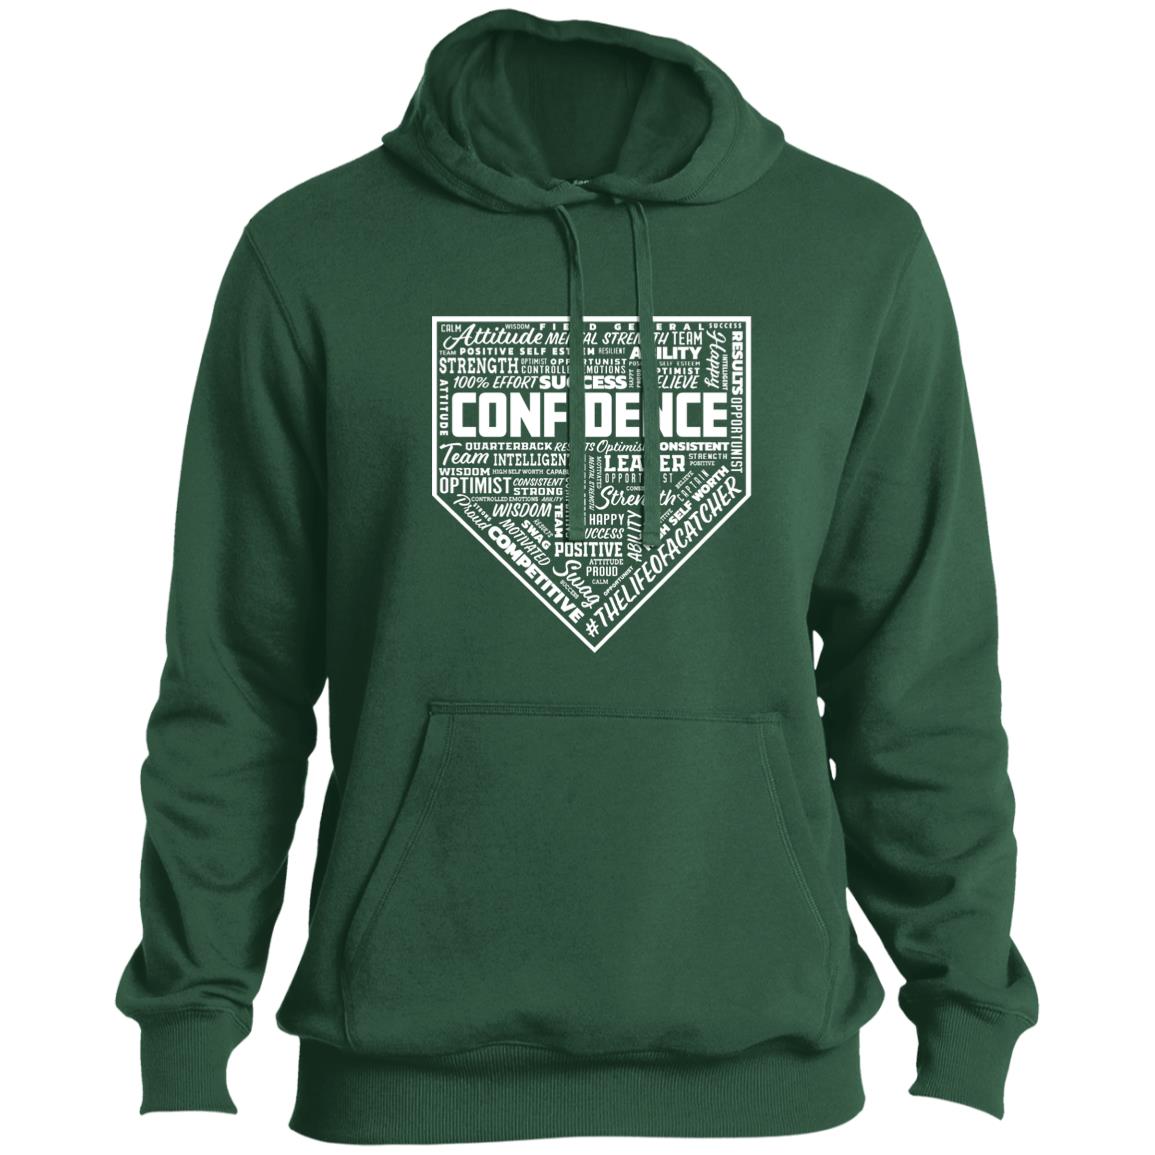 The Catching Guy Catcher Confidence Pullover Hoodie in green